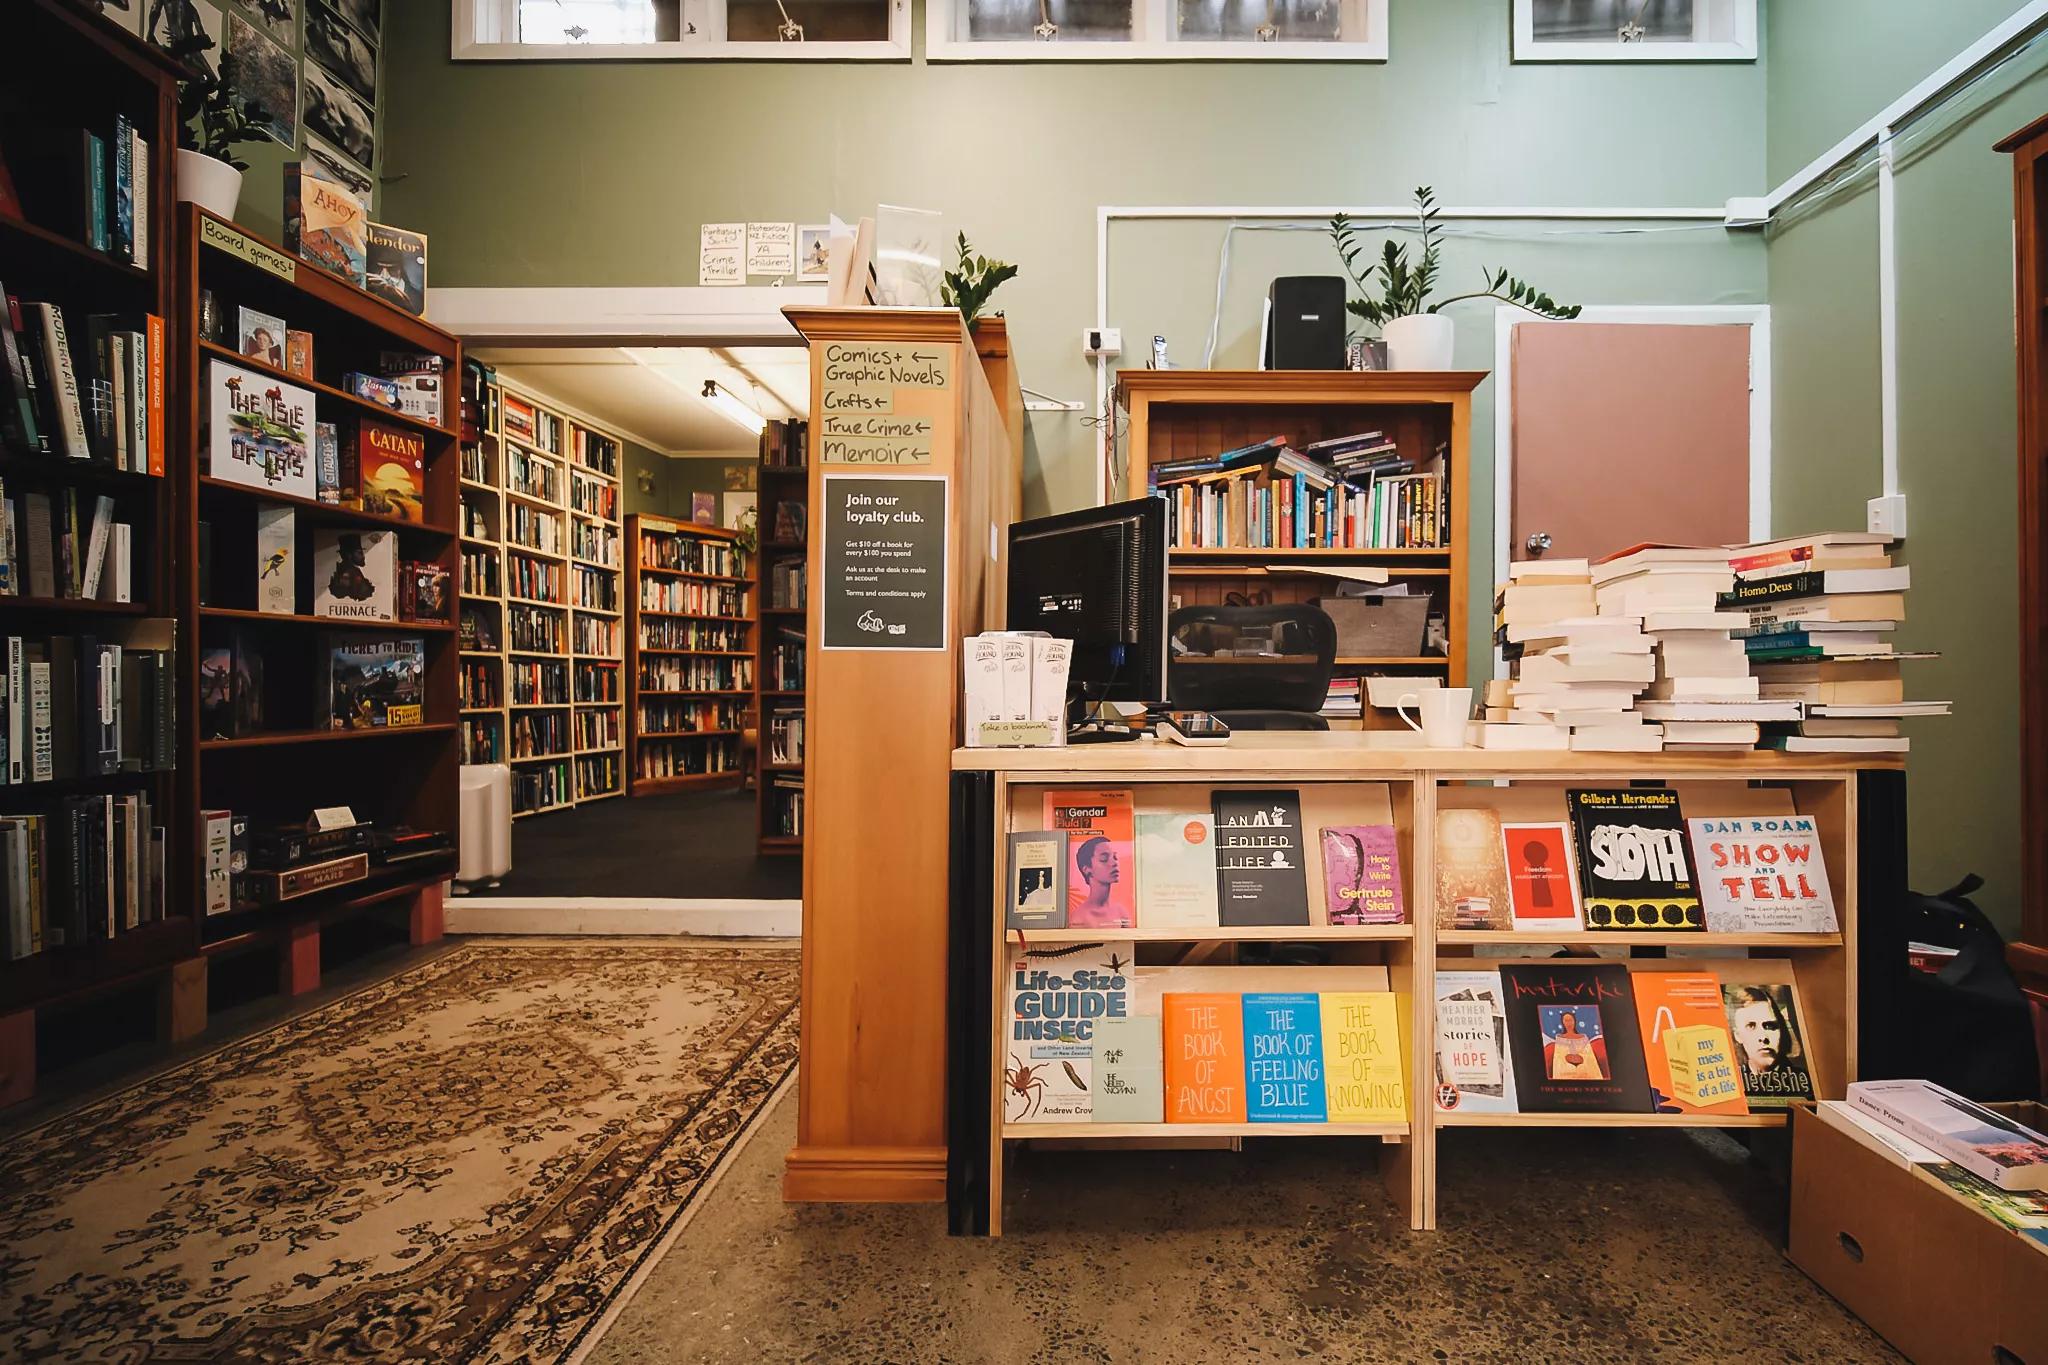 The check-out counter at Book Hound, a bookstore in Newtown, Wellington. The small space has pale green walls, a Persian rug, and wooden shelves filled with books. 